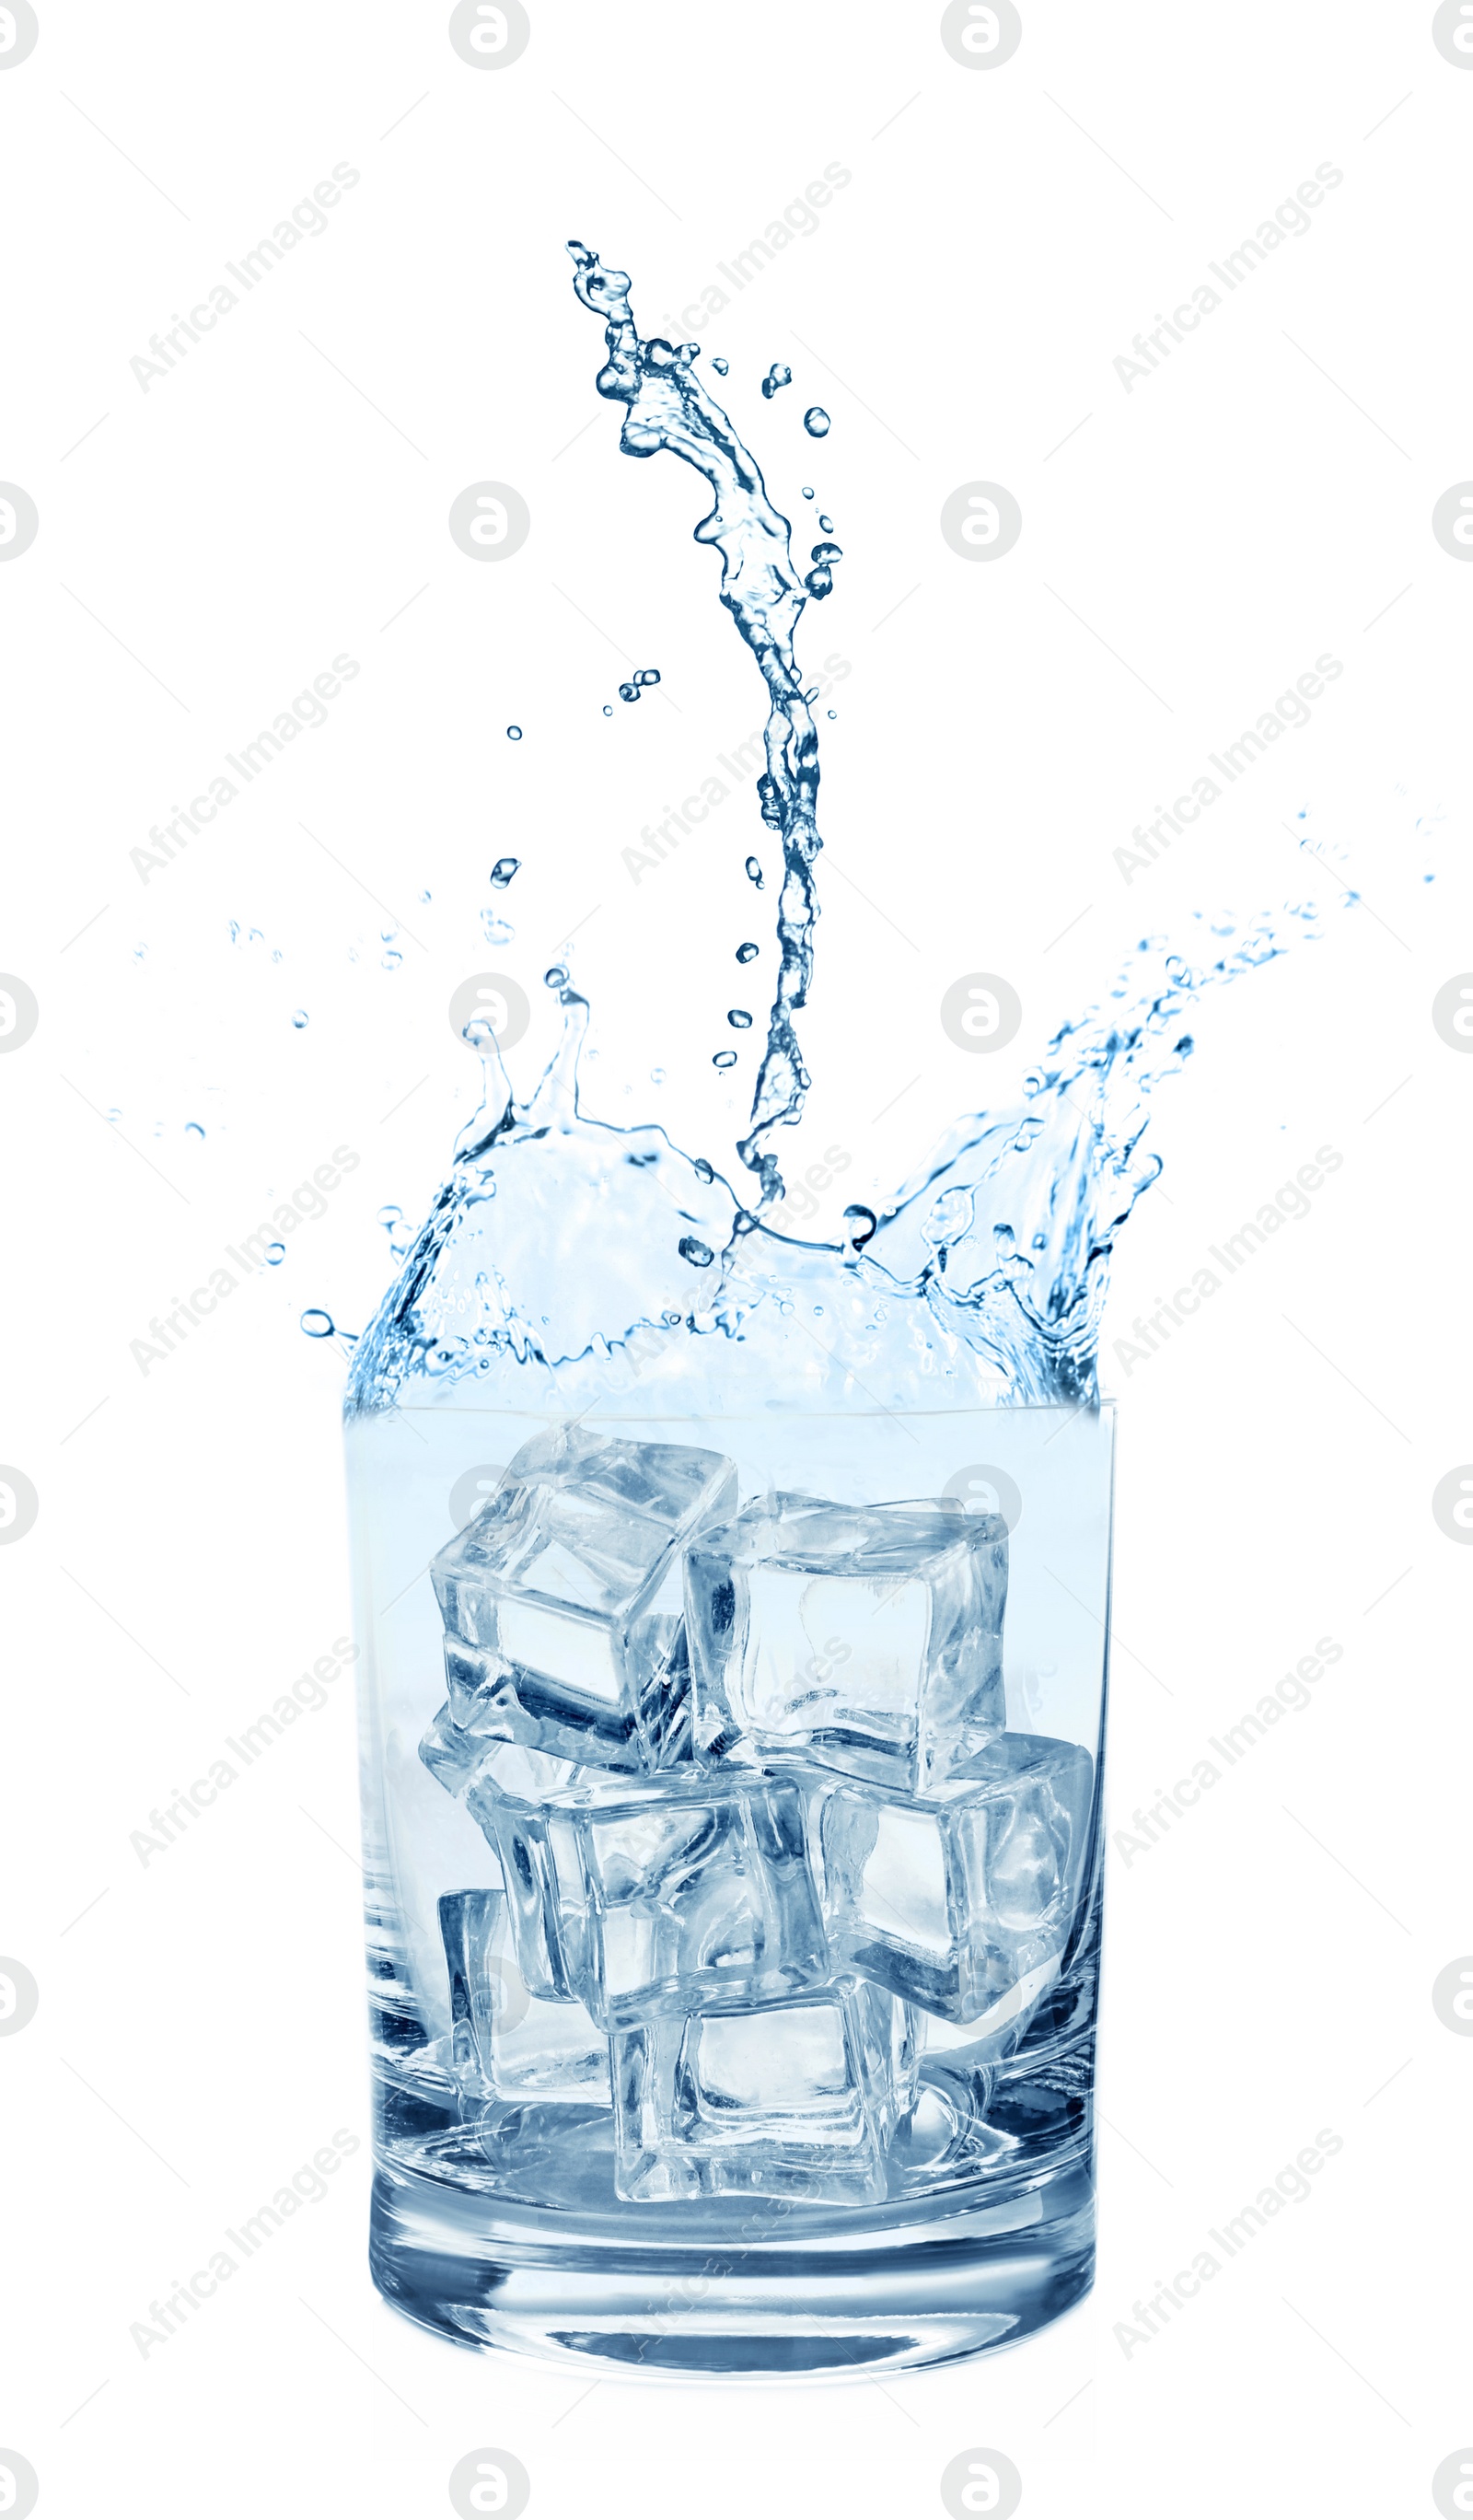 Image of Water splashing out of glass with ice cubes on white background. Refreshing drink